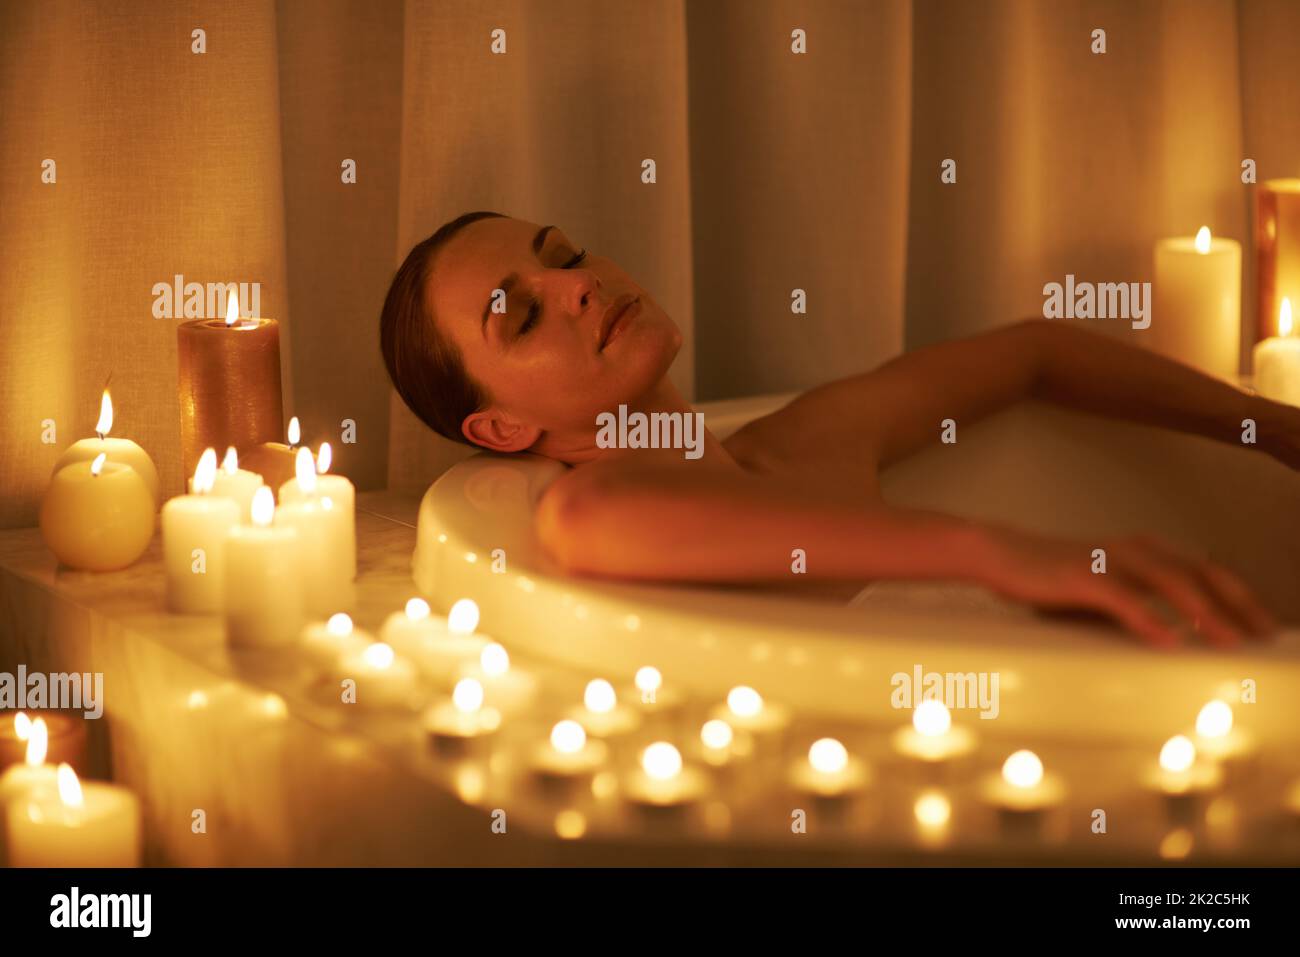 https://c8.alamy.com/comp/2K2C5HK/the-weeks-worries-washed-away-cropped-shot-of-a-gorgeous-woman-relaxing-in-a-candle-lit-bath-2K2C5HK.jpg